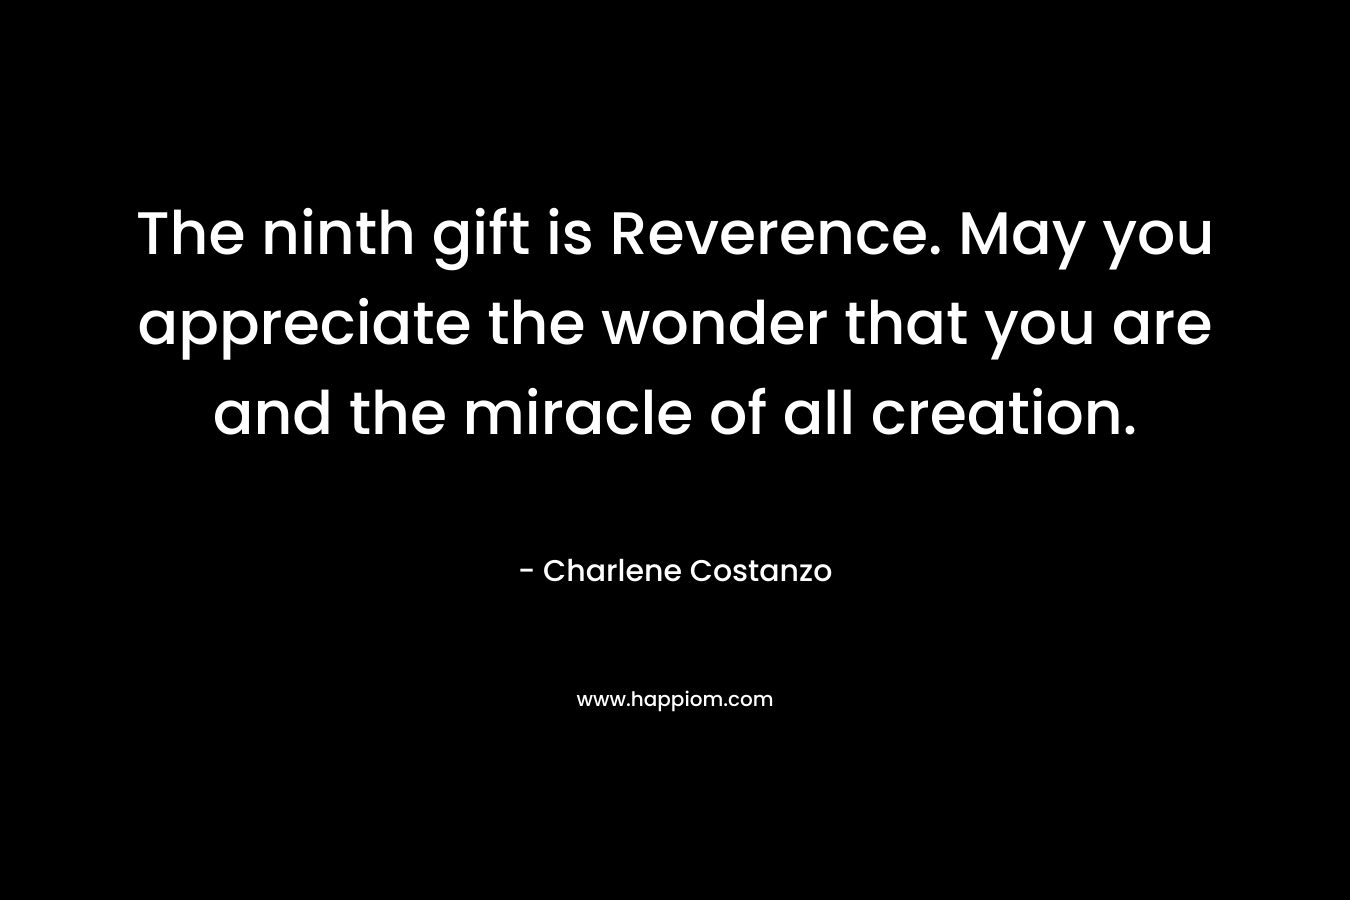 The ninth gift is Reverence. May you appreciate the wonder that you are and the miracle of all creation. – Charlene Costanzo